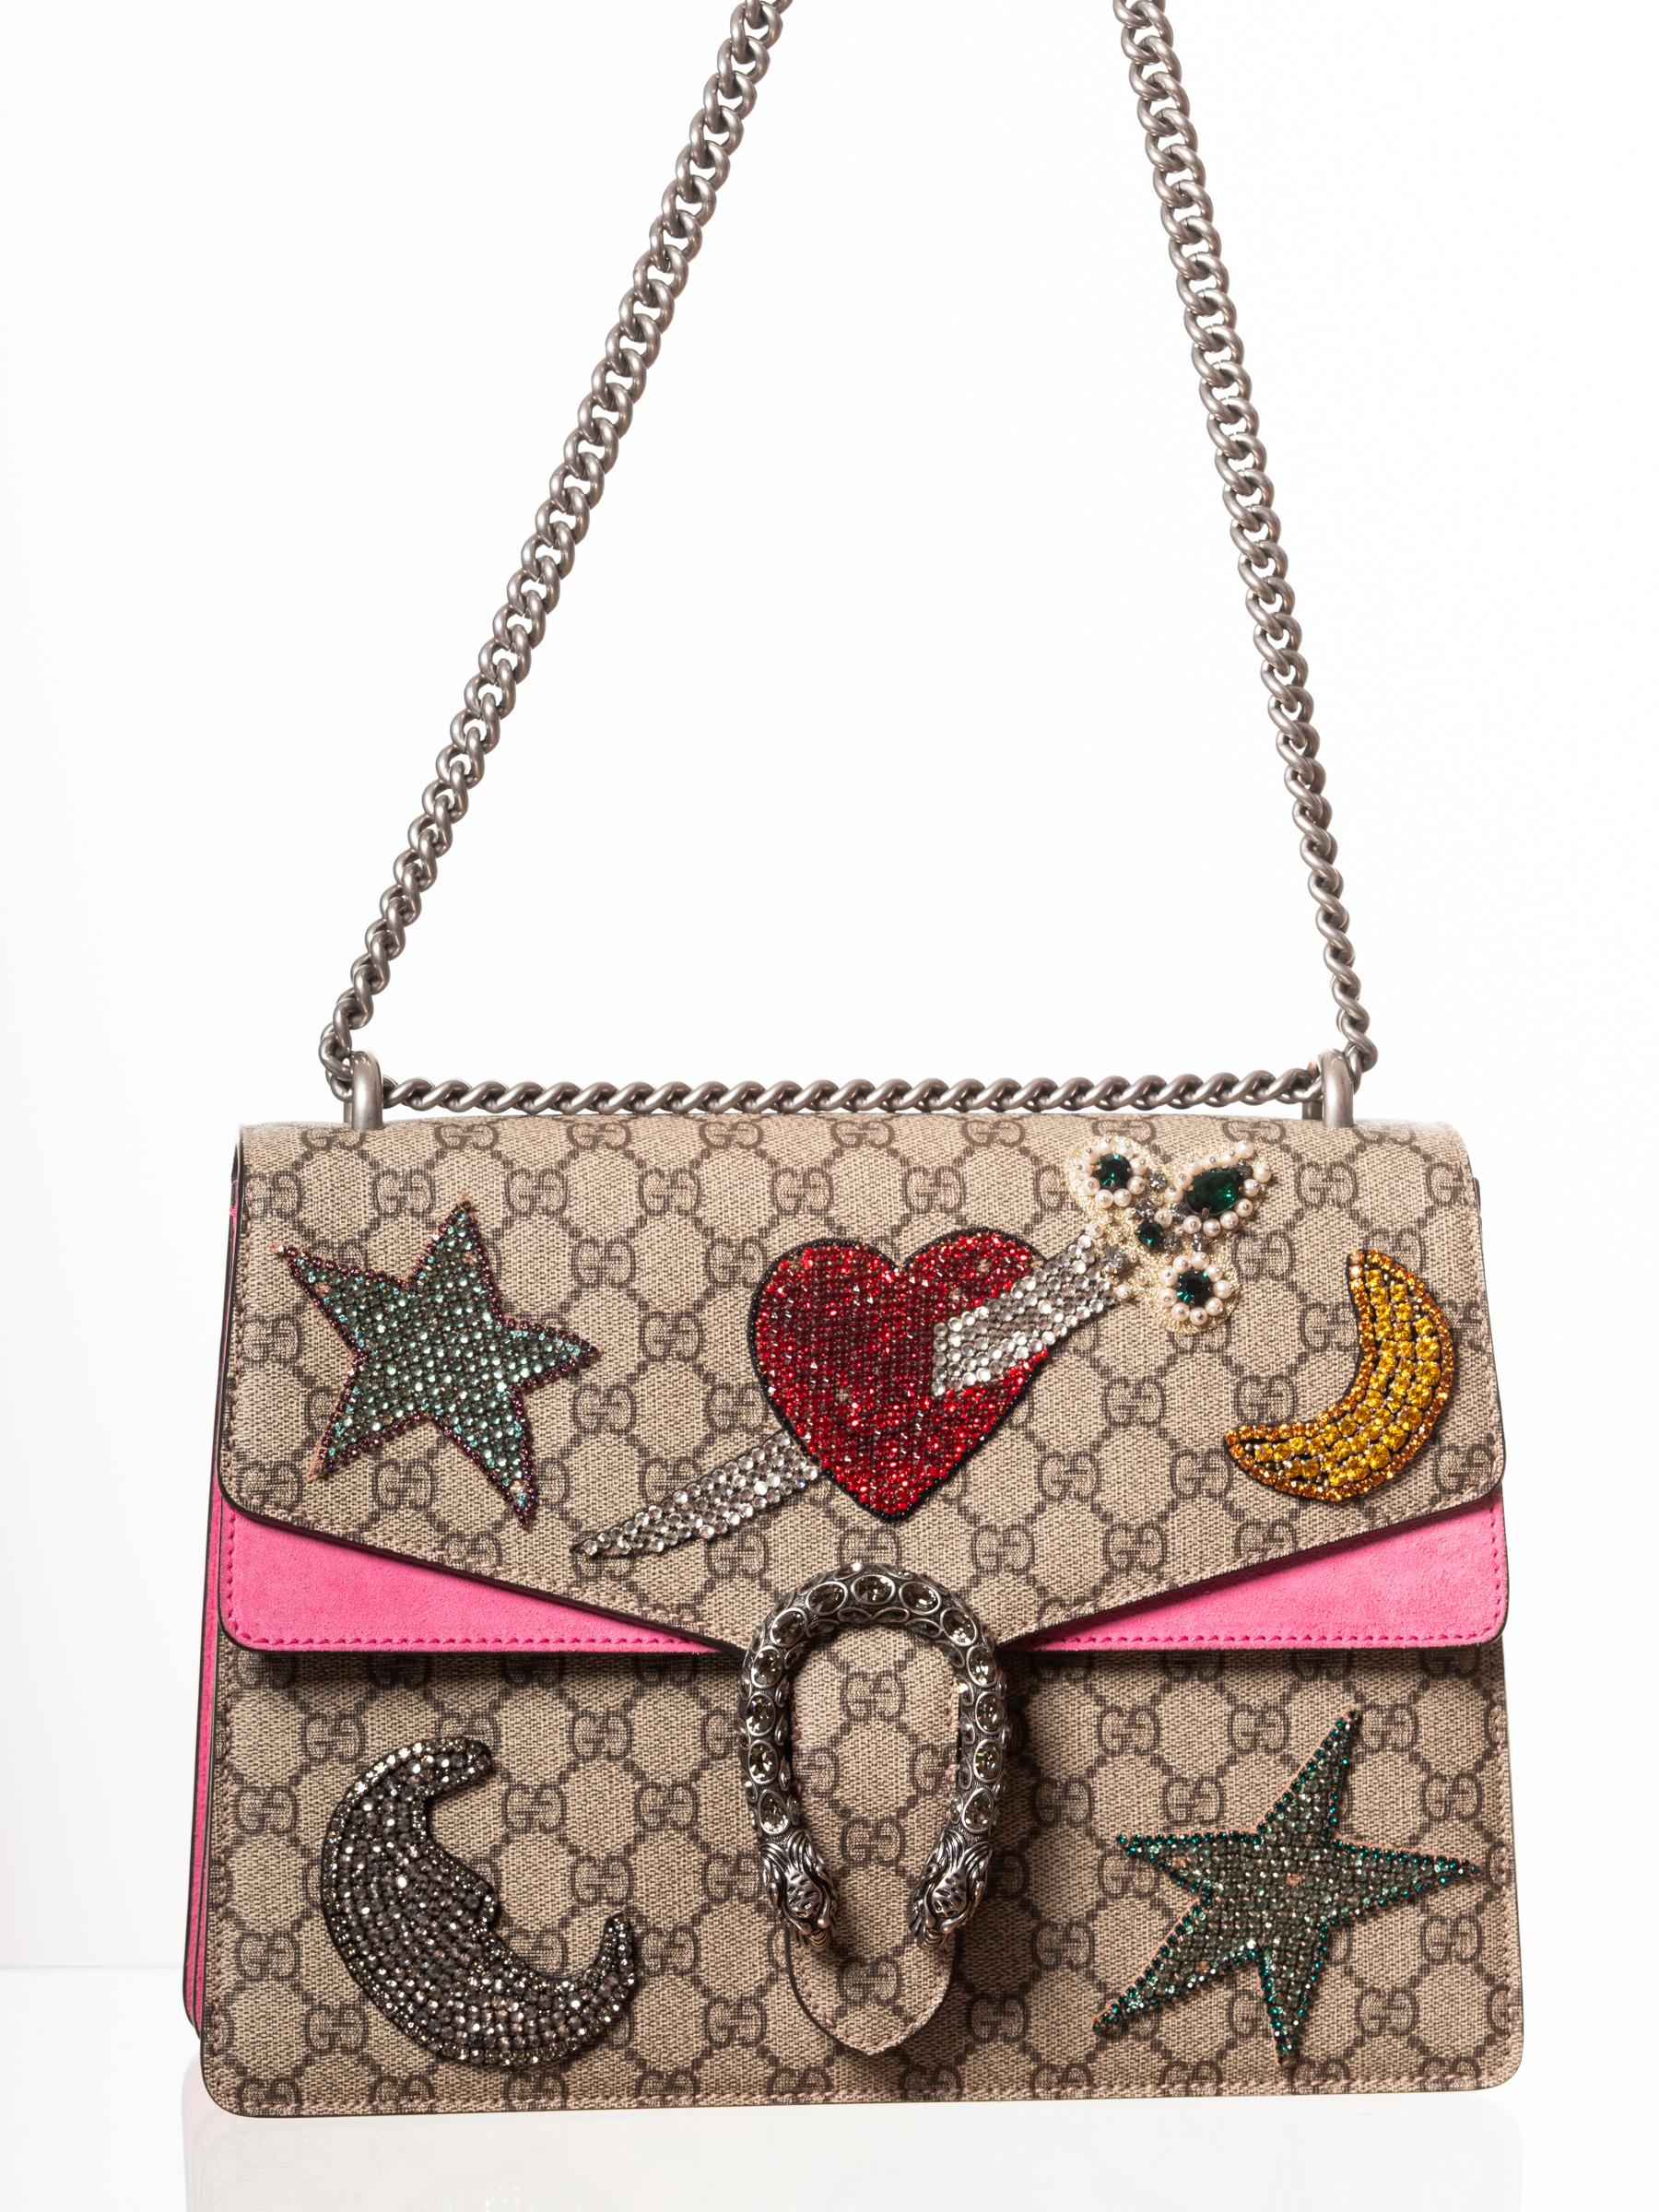 This authentic Gucci Dionysus Handbag is named after the Greek God & created by famed designer Alessandro Michele in his Spring/Summer 2016 Collection. Crafted from taupe GG coated canvas with stand-out sequin embellishments, this avant-garde